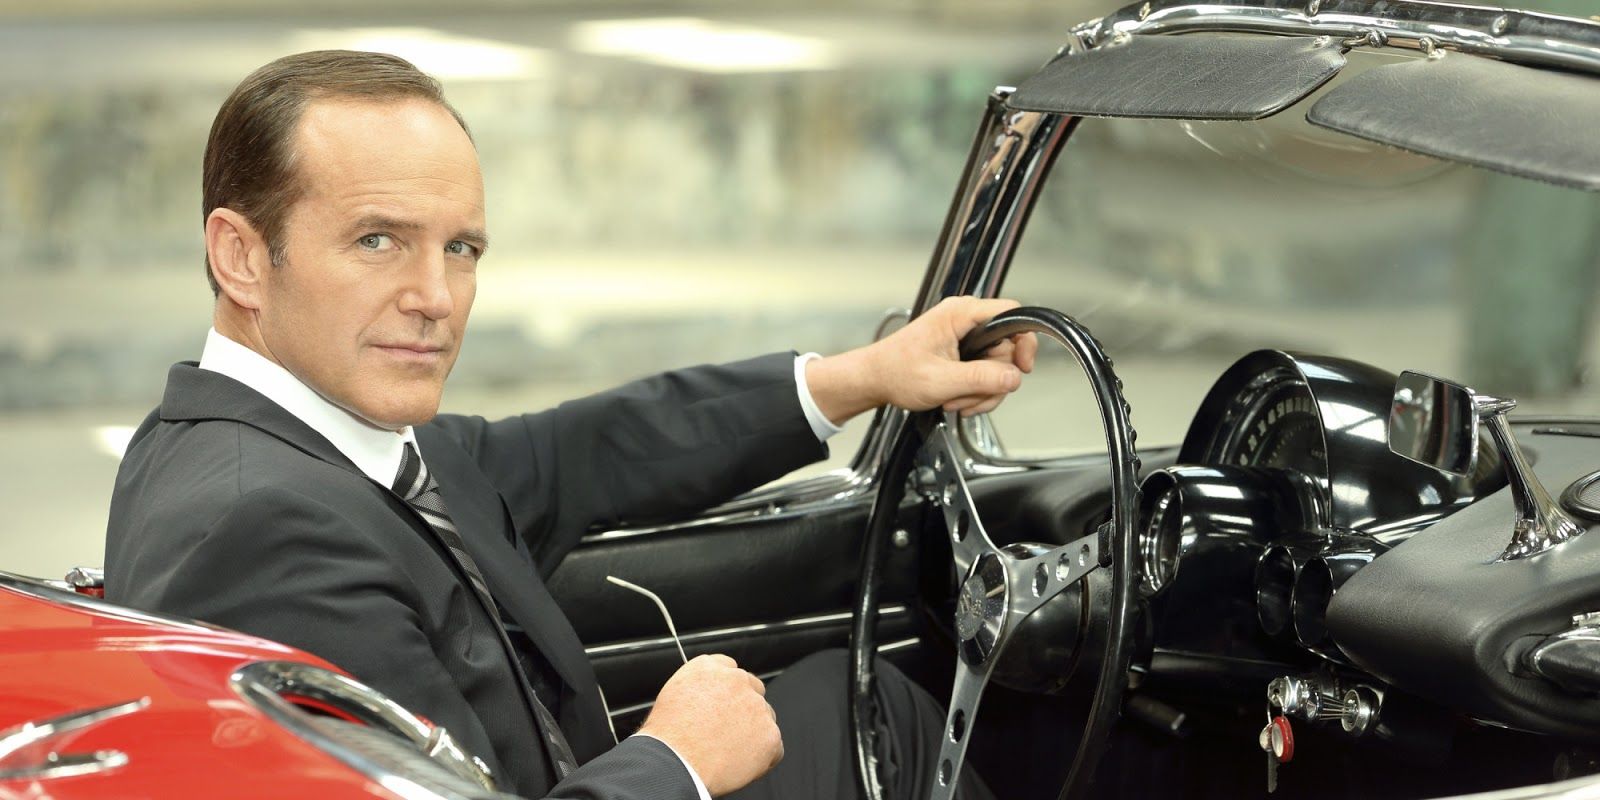 Phil Coulson from Agents of Shield